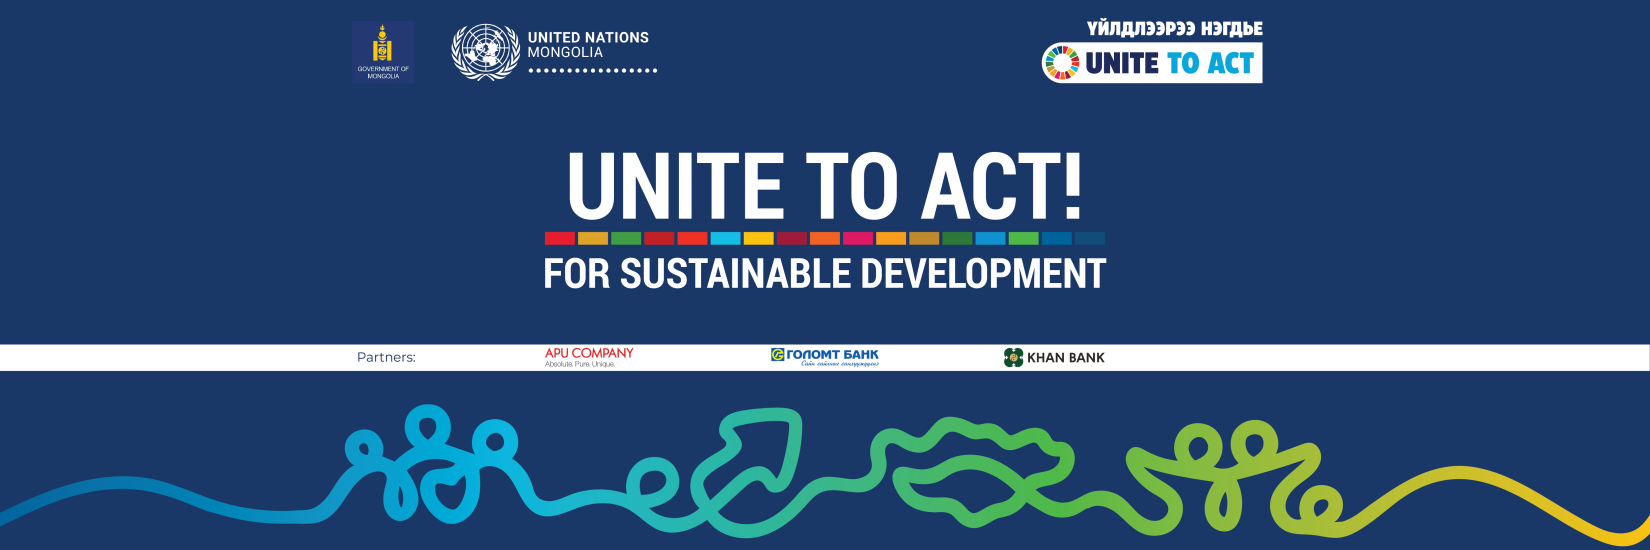 unite to act banner